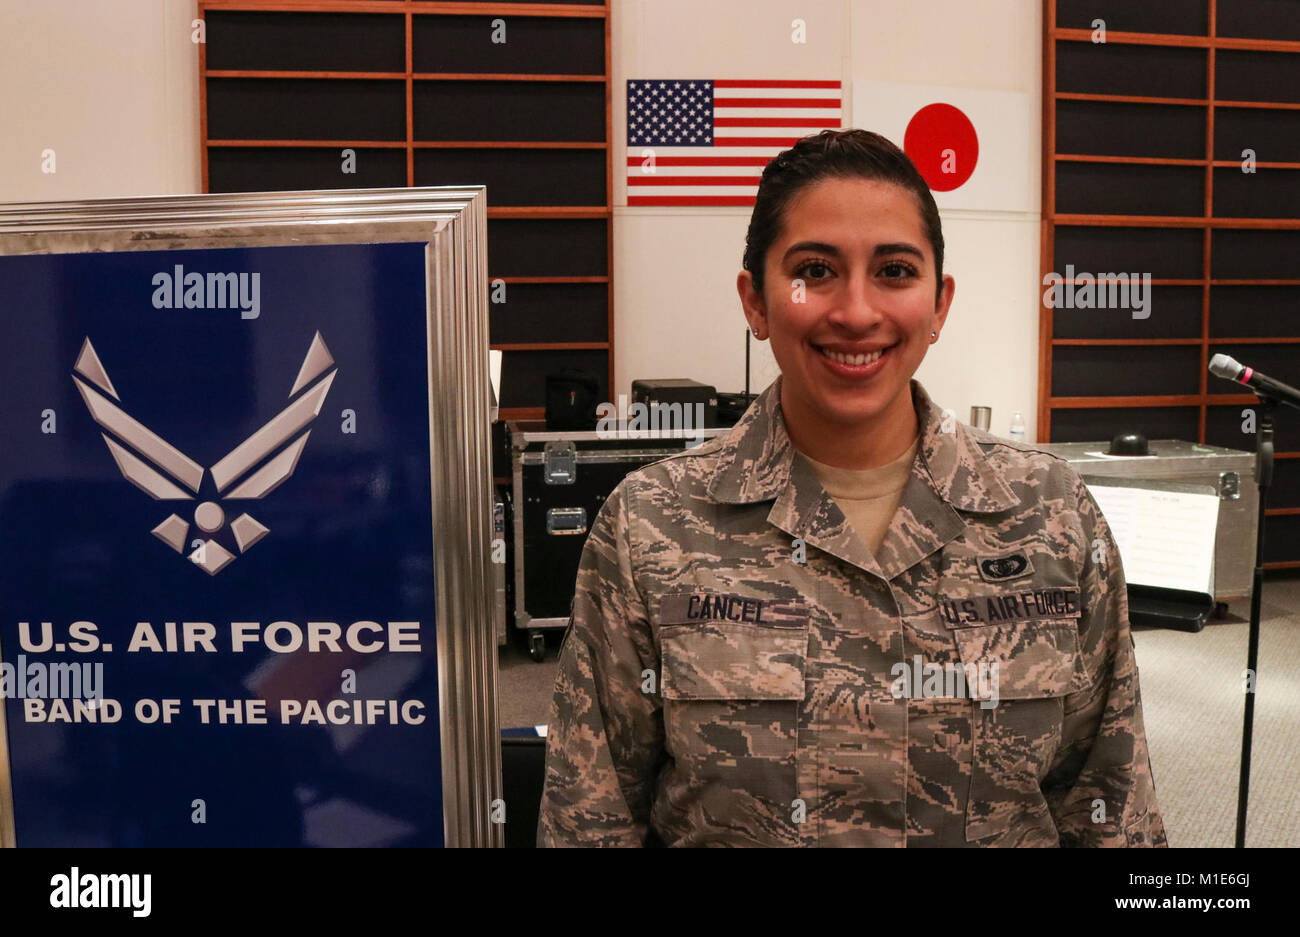 Senior Airman Alycia Cancel, U.S. Air Force Band of Pacific-Asia vocalist, stands inside a band studio at Yokota Air Base, Japan, Jan. 19, 2018. Cancel joined the Air Force band as a way to gain experience performing prior to becoming a music teacher. (U.S. Air Force Stock Photo